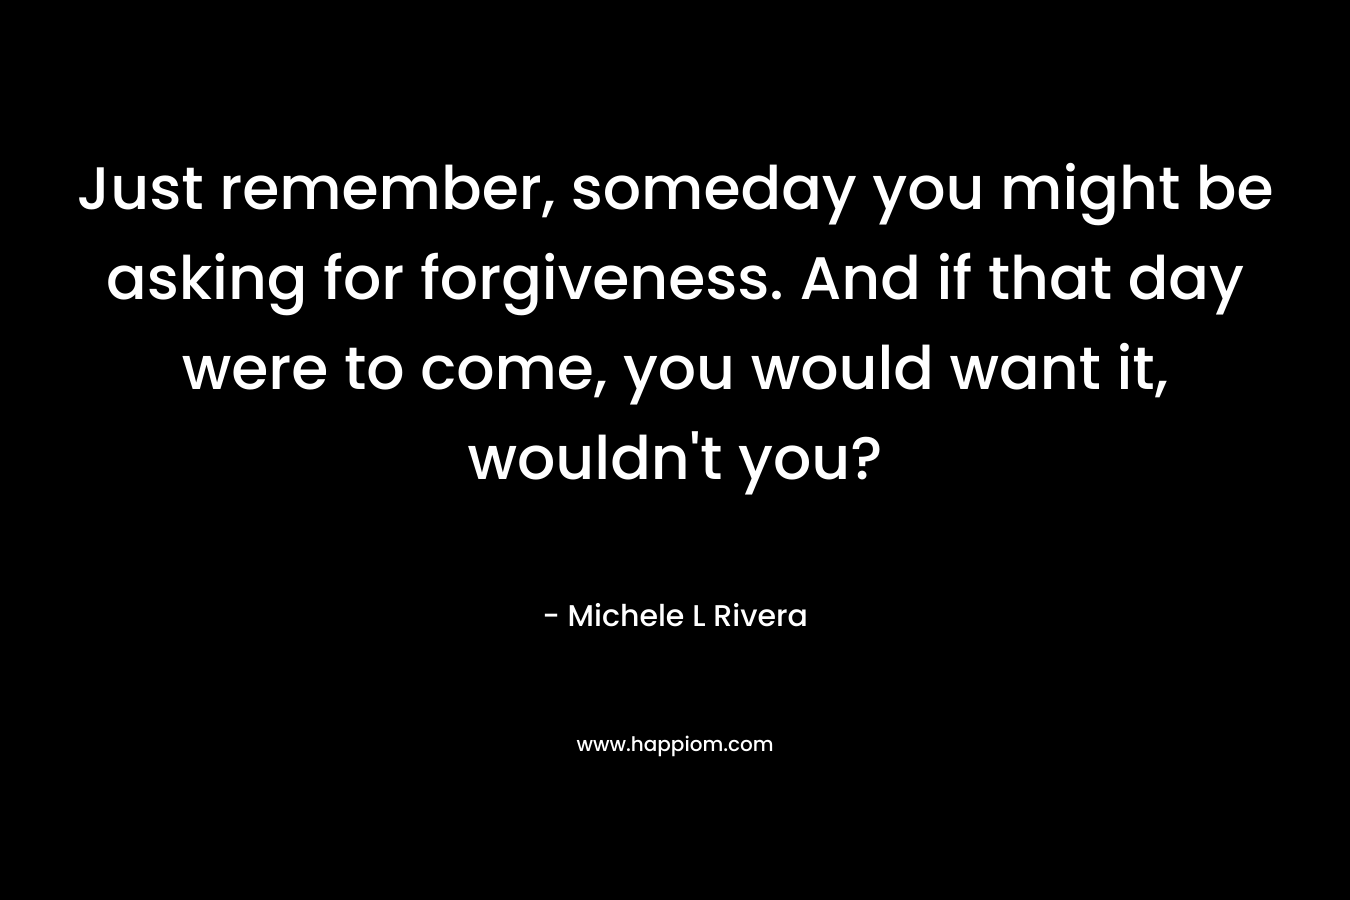 Just remember, someday you might be asking for forgiveness. And if that day were to come, you would want it, wouldn't you?